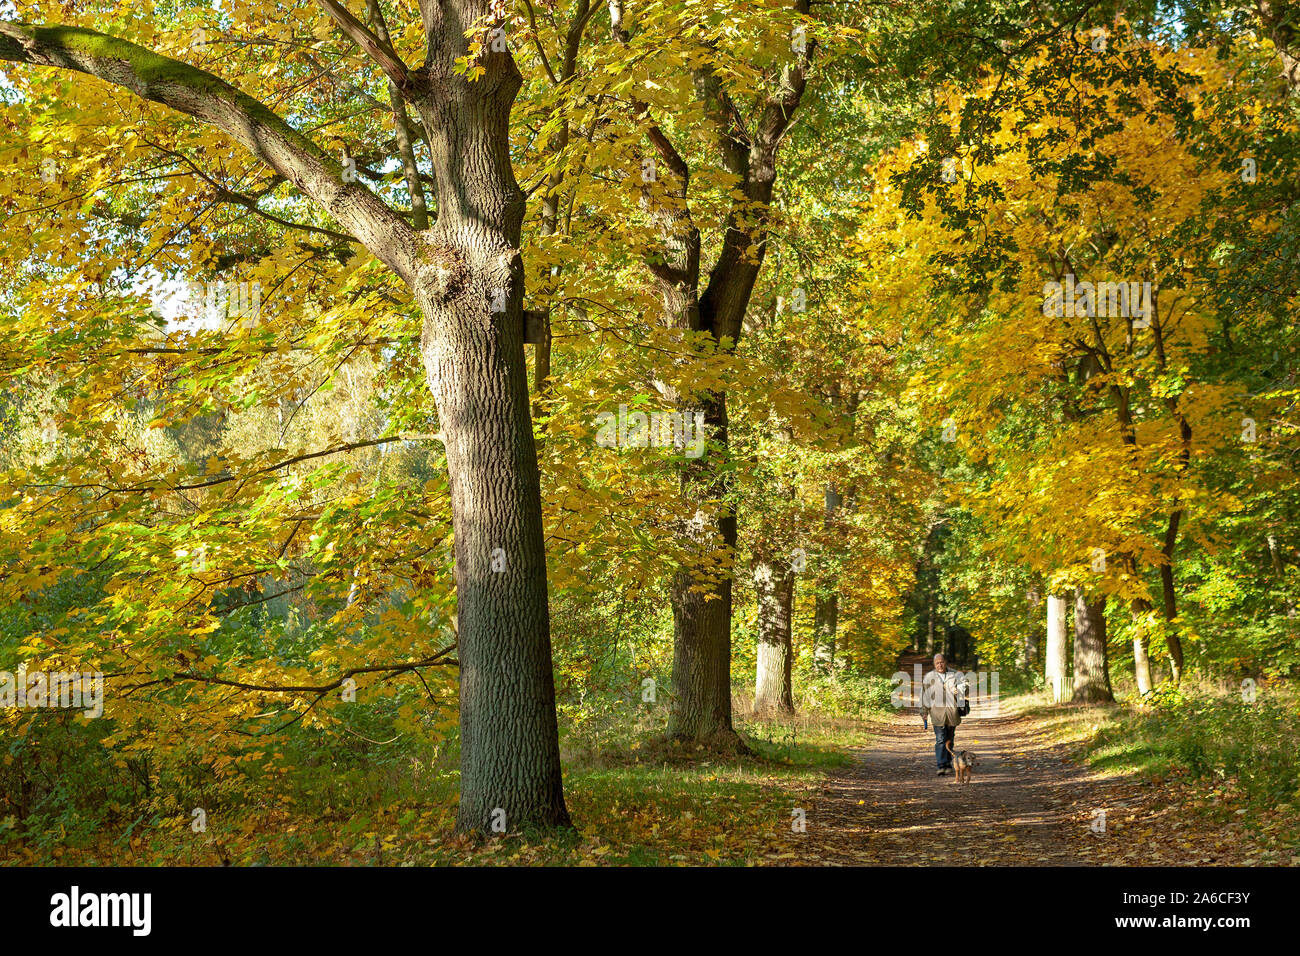 A forest track in Lower Saxony, Northern Germany in autumn. Stock Photo